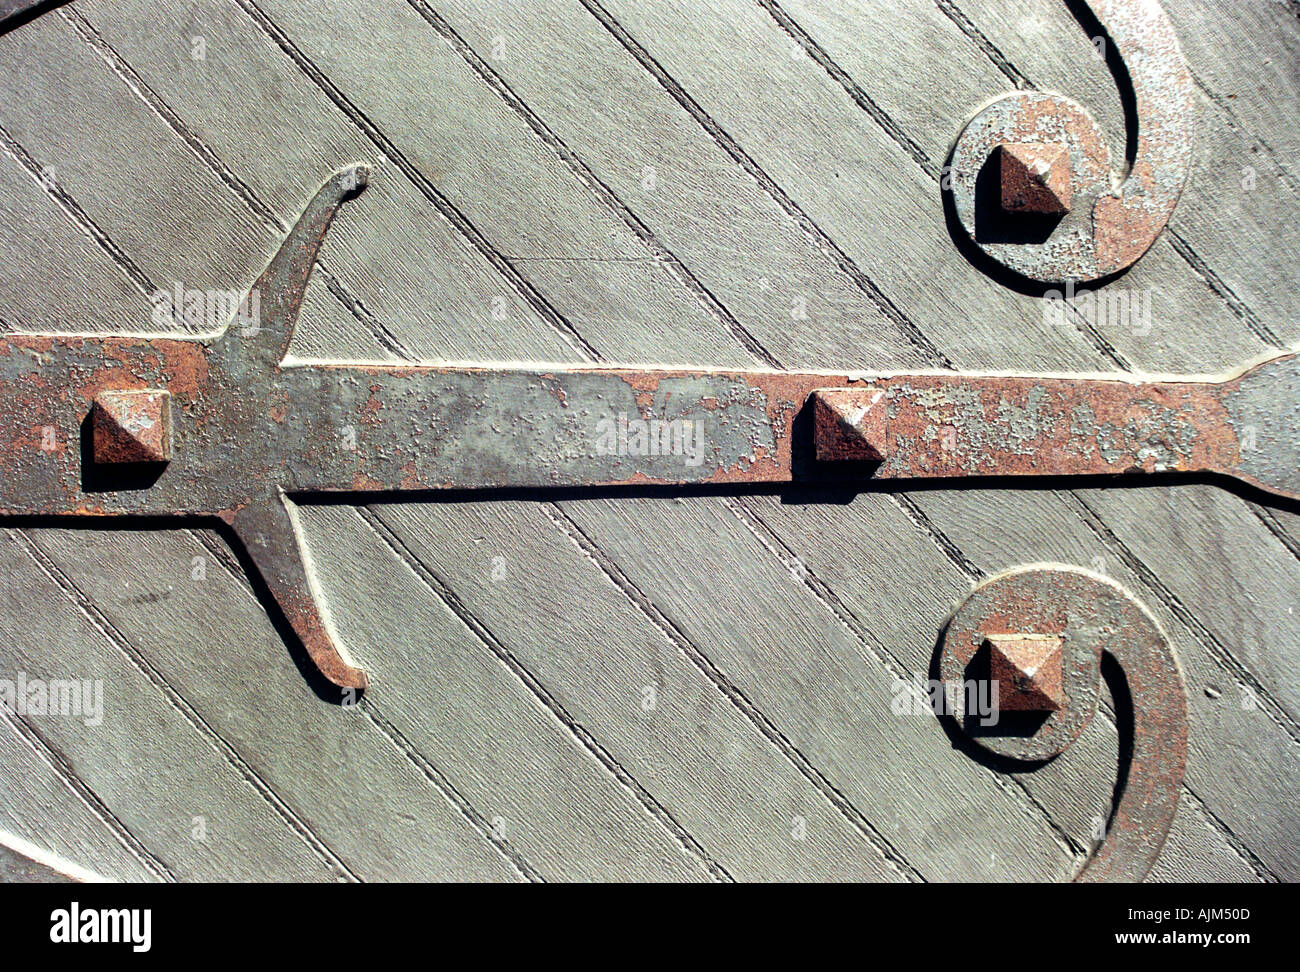 A close up view of a hinge on an old door in Harvard University in Cambridge Massachusetts Stock Photo